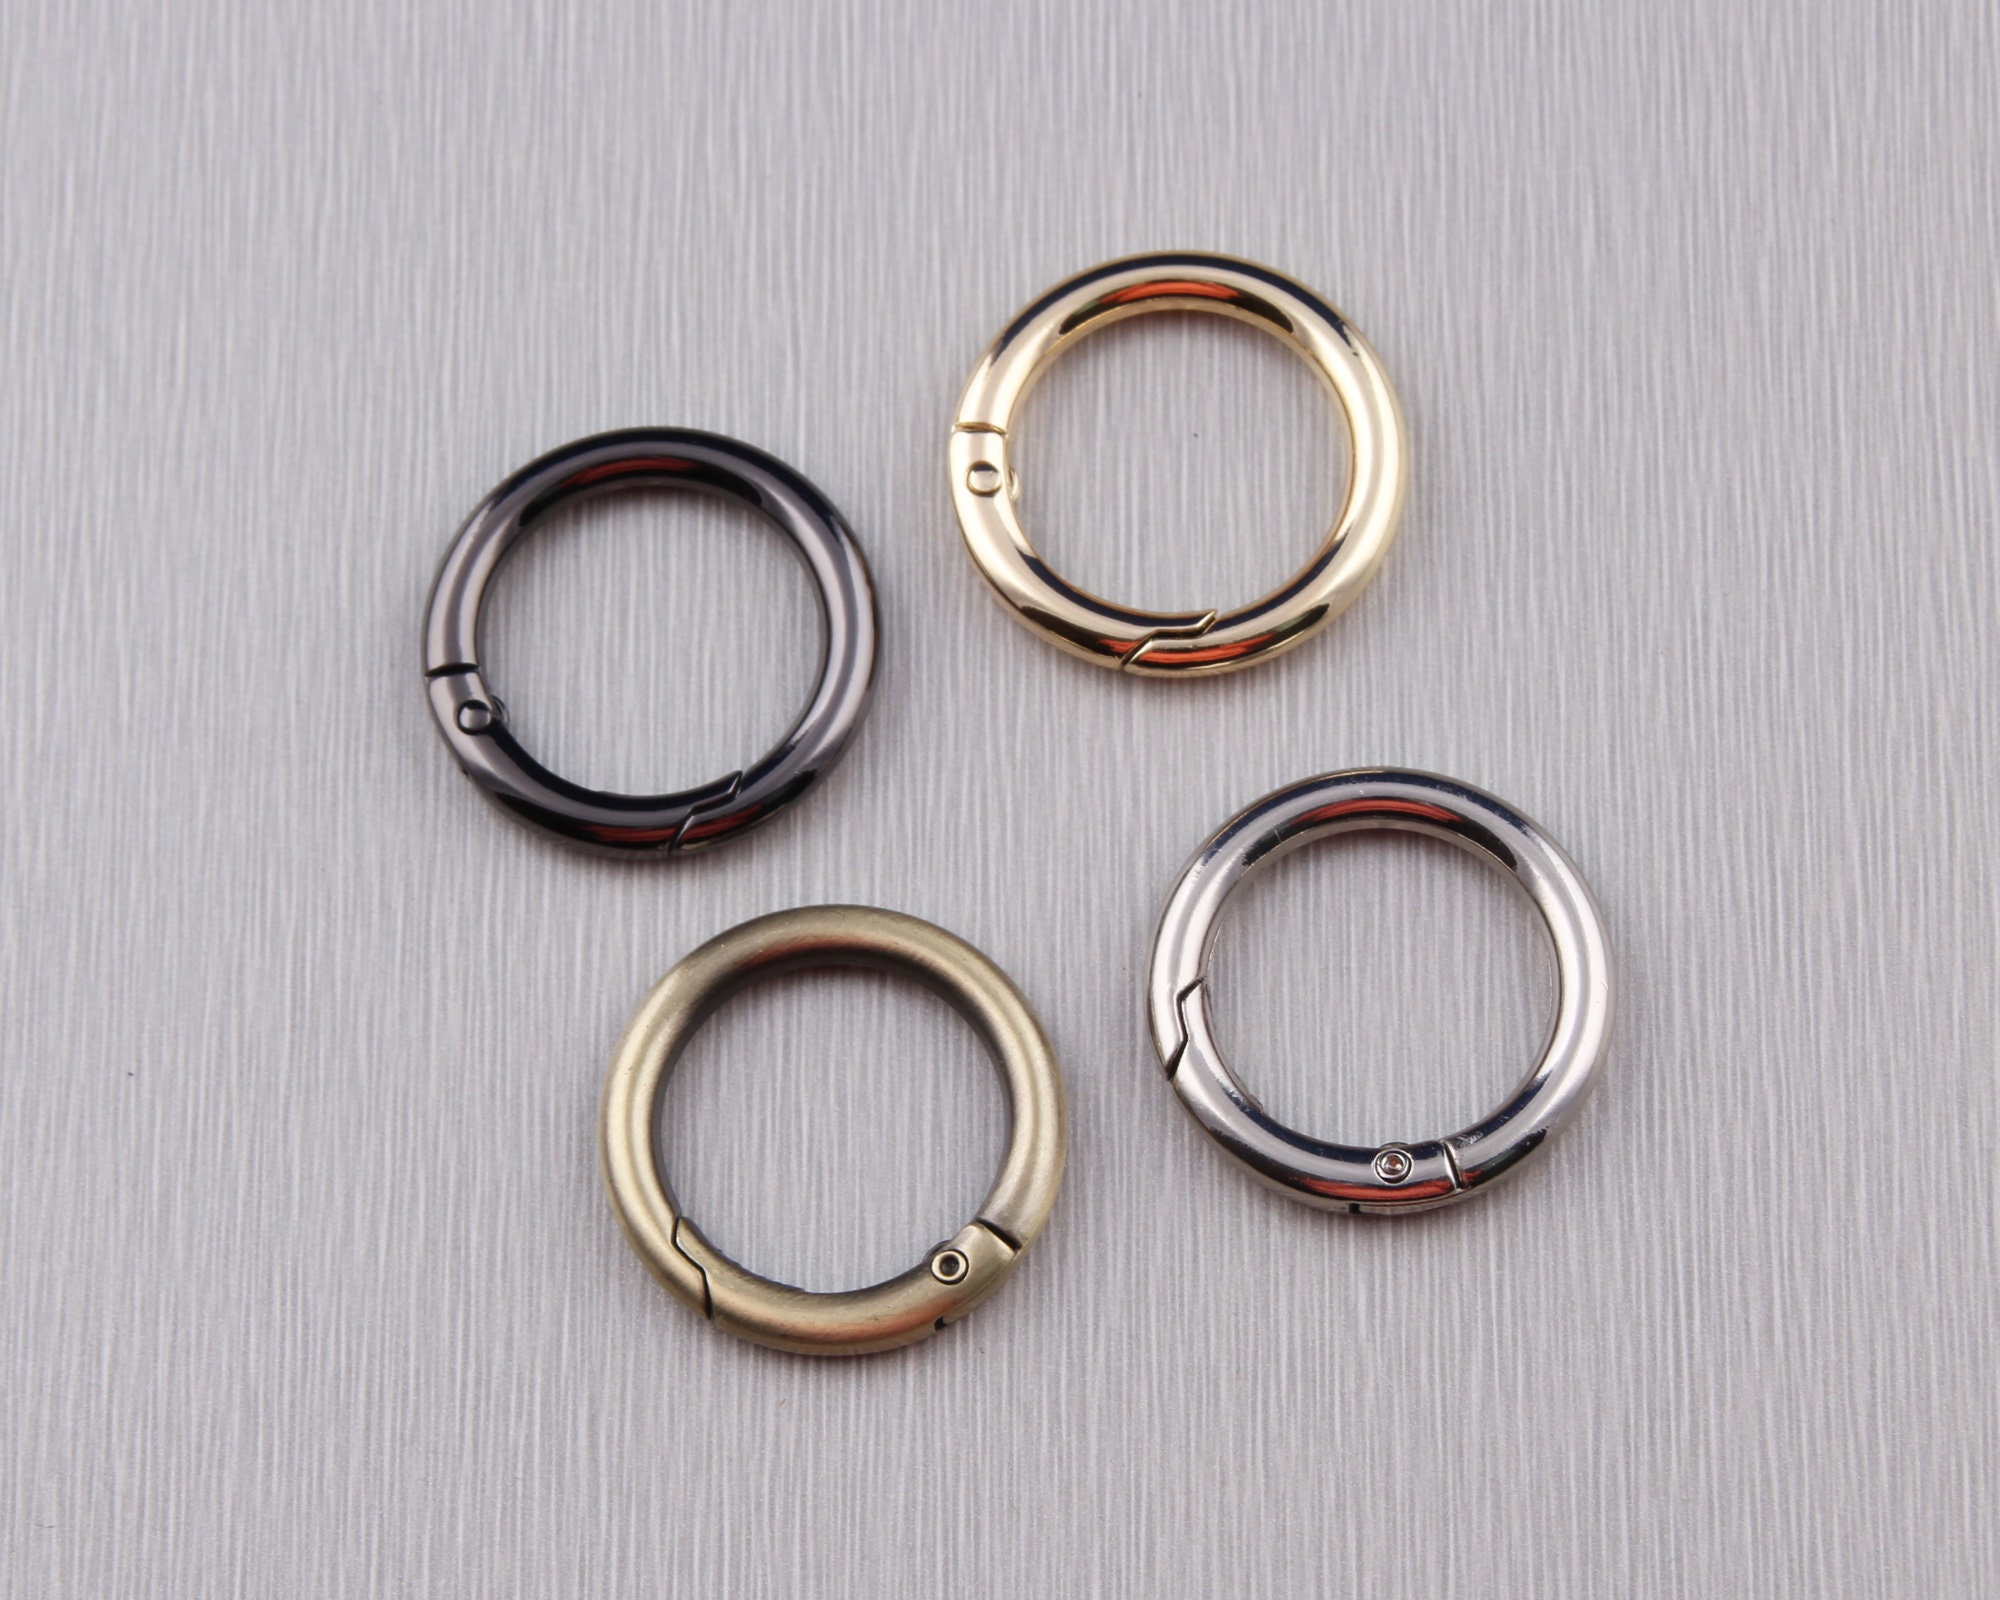 25MM Spring O Ring, Round Carabiner, Spring Gate, Round Clasp, Snap Hook,  Metal O Rings for Handbags, Purses, Key Ring Buckle, O Ring Clip 